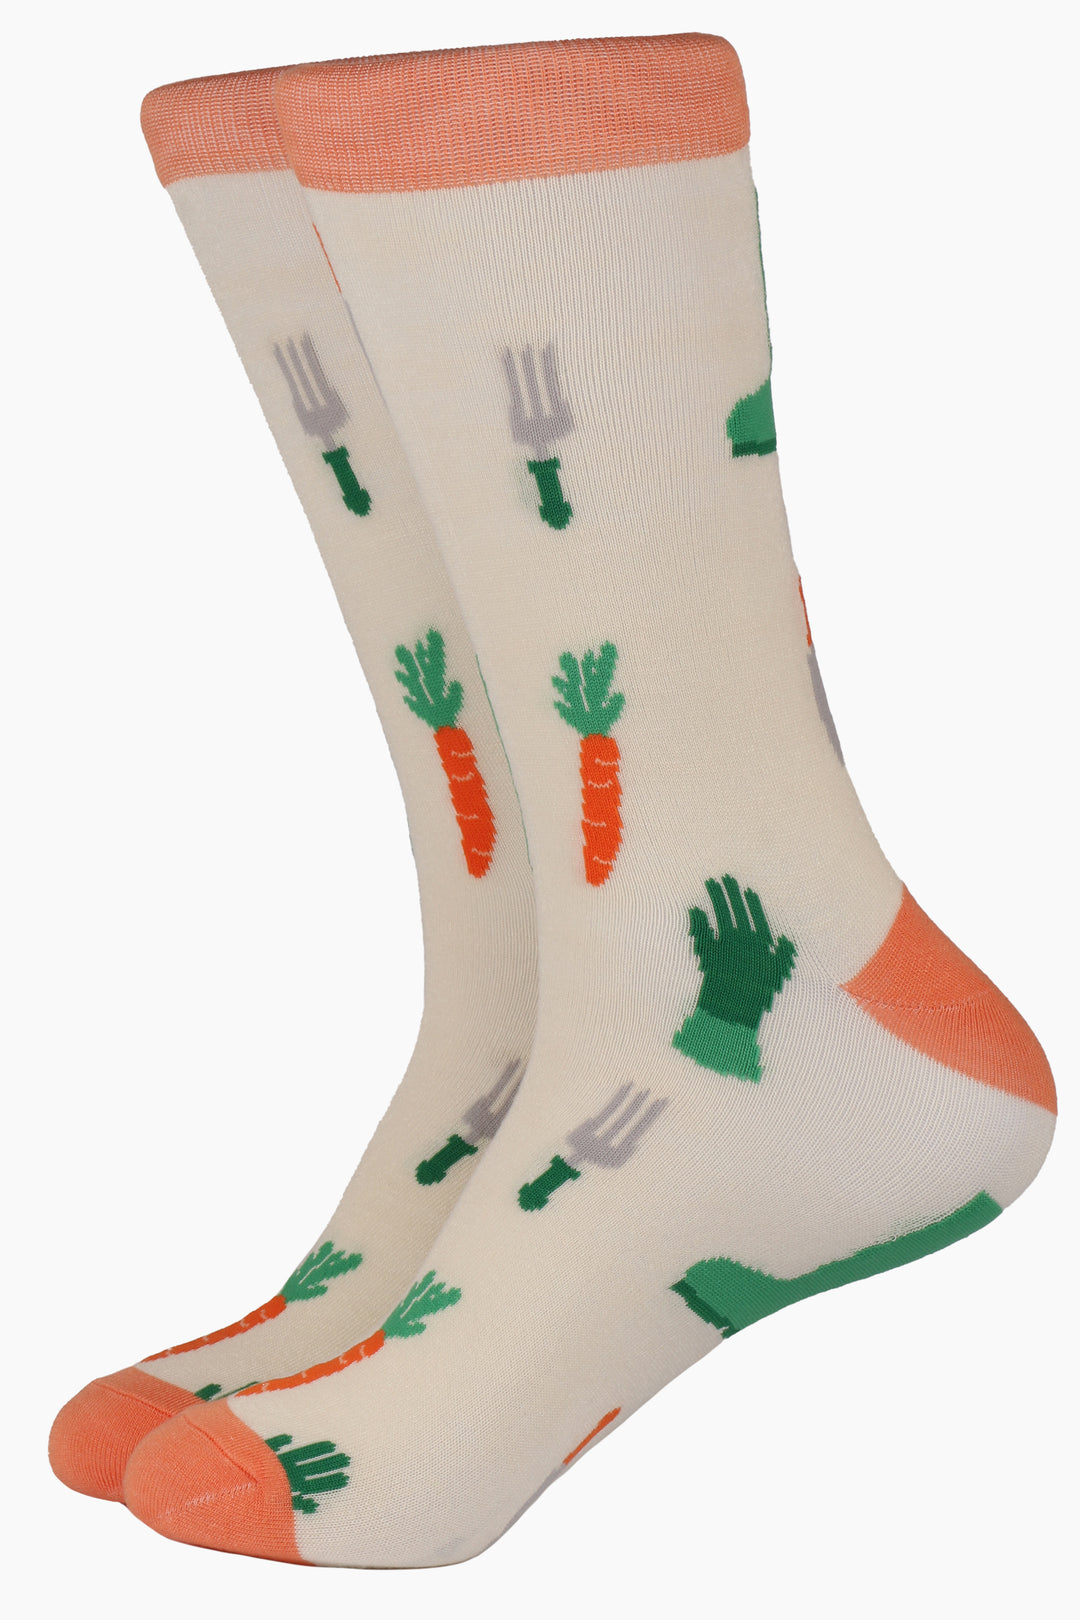 cream bamboo socks with an orange heel, toe and cuff with an all over pattern of orange carrots, green gardening gloves and garden tools